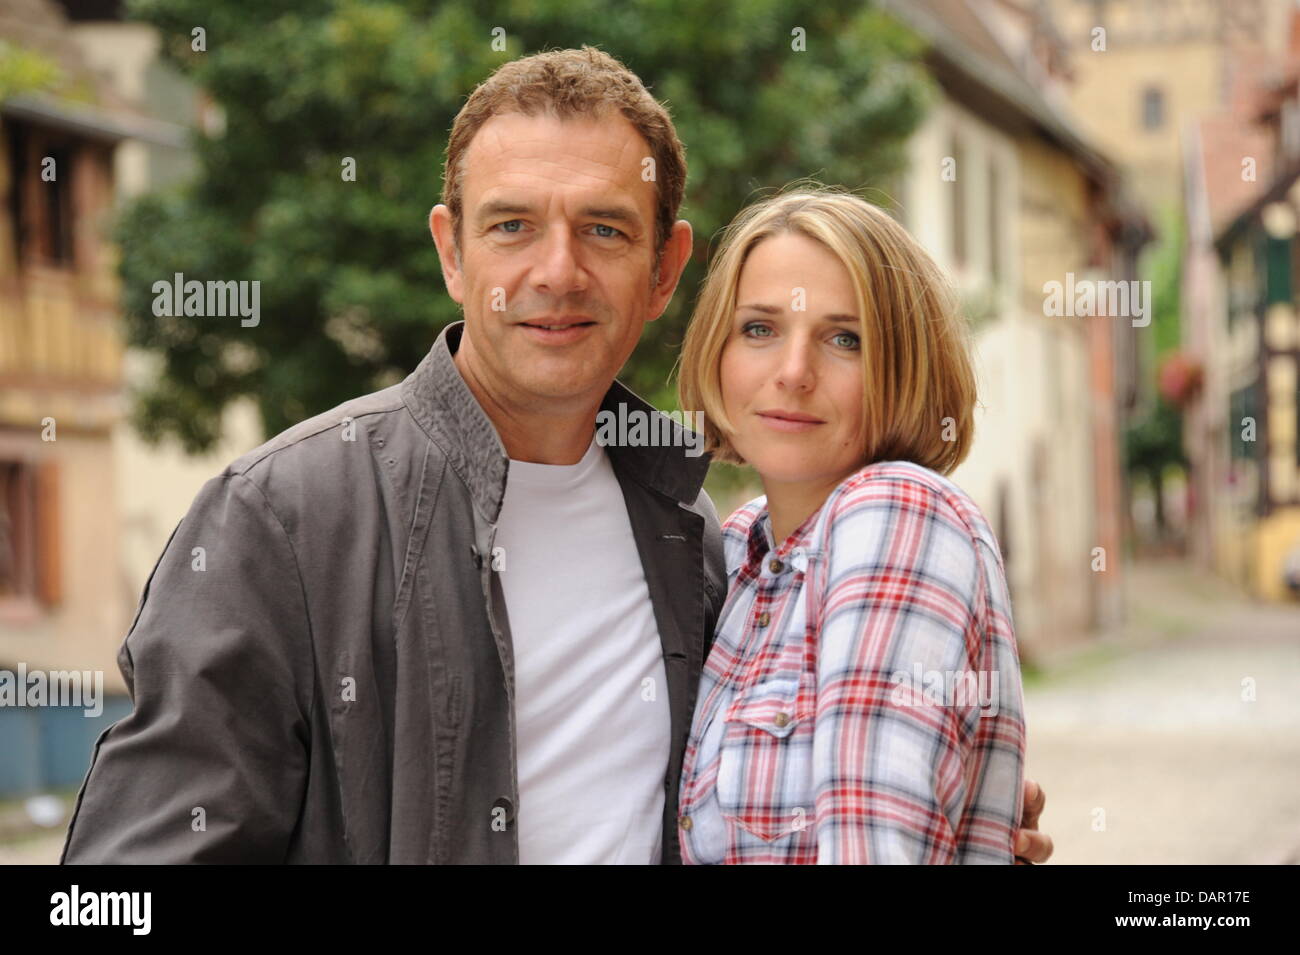 Actor Jean-Yves Berteloot as Marc von der Lohe and actress Tanja Wedhorn as business woman Jeanine Weiss poses during filming for the German television broadcaster ZDF's production of "Ein Sommer im Elsass" ("A Summer in Alsace") in Bergheim, France, 08 September 2011. The six film in the ZDF Sunday film series takes place in Alsace. Jeanine Weiss, business woman from Berlin, arriv Stock Photo